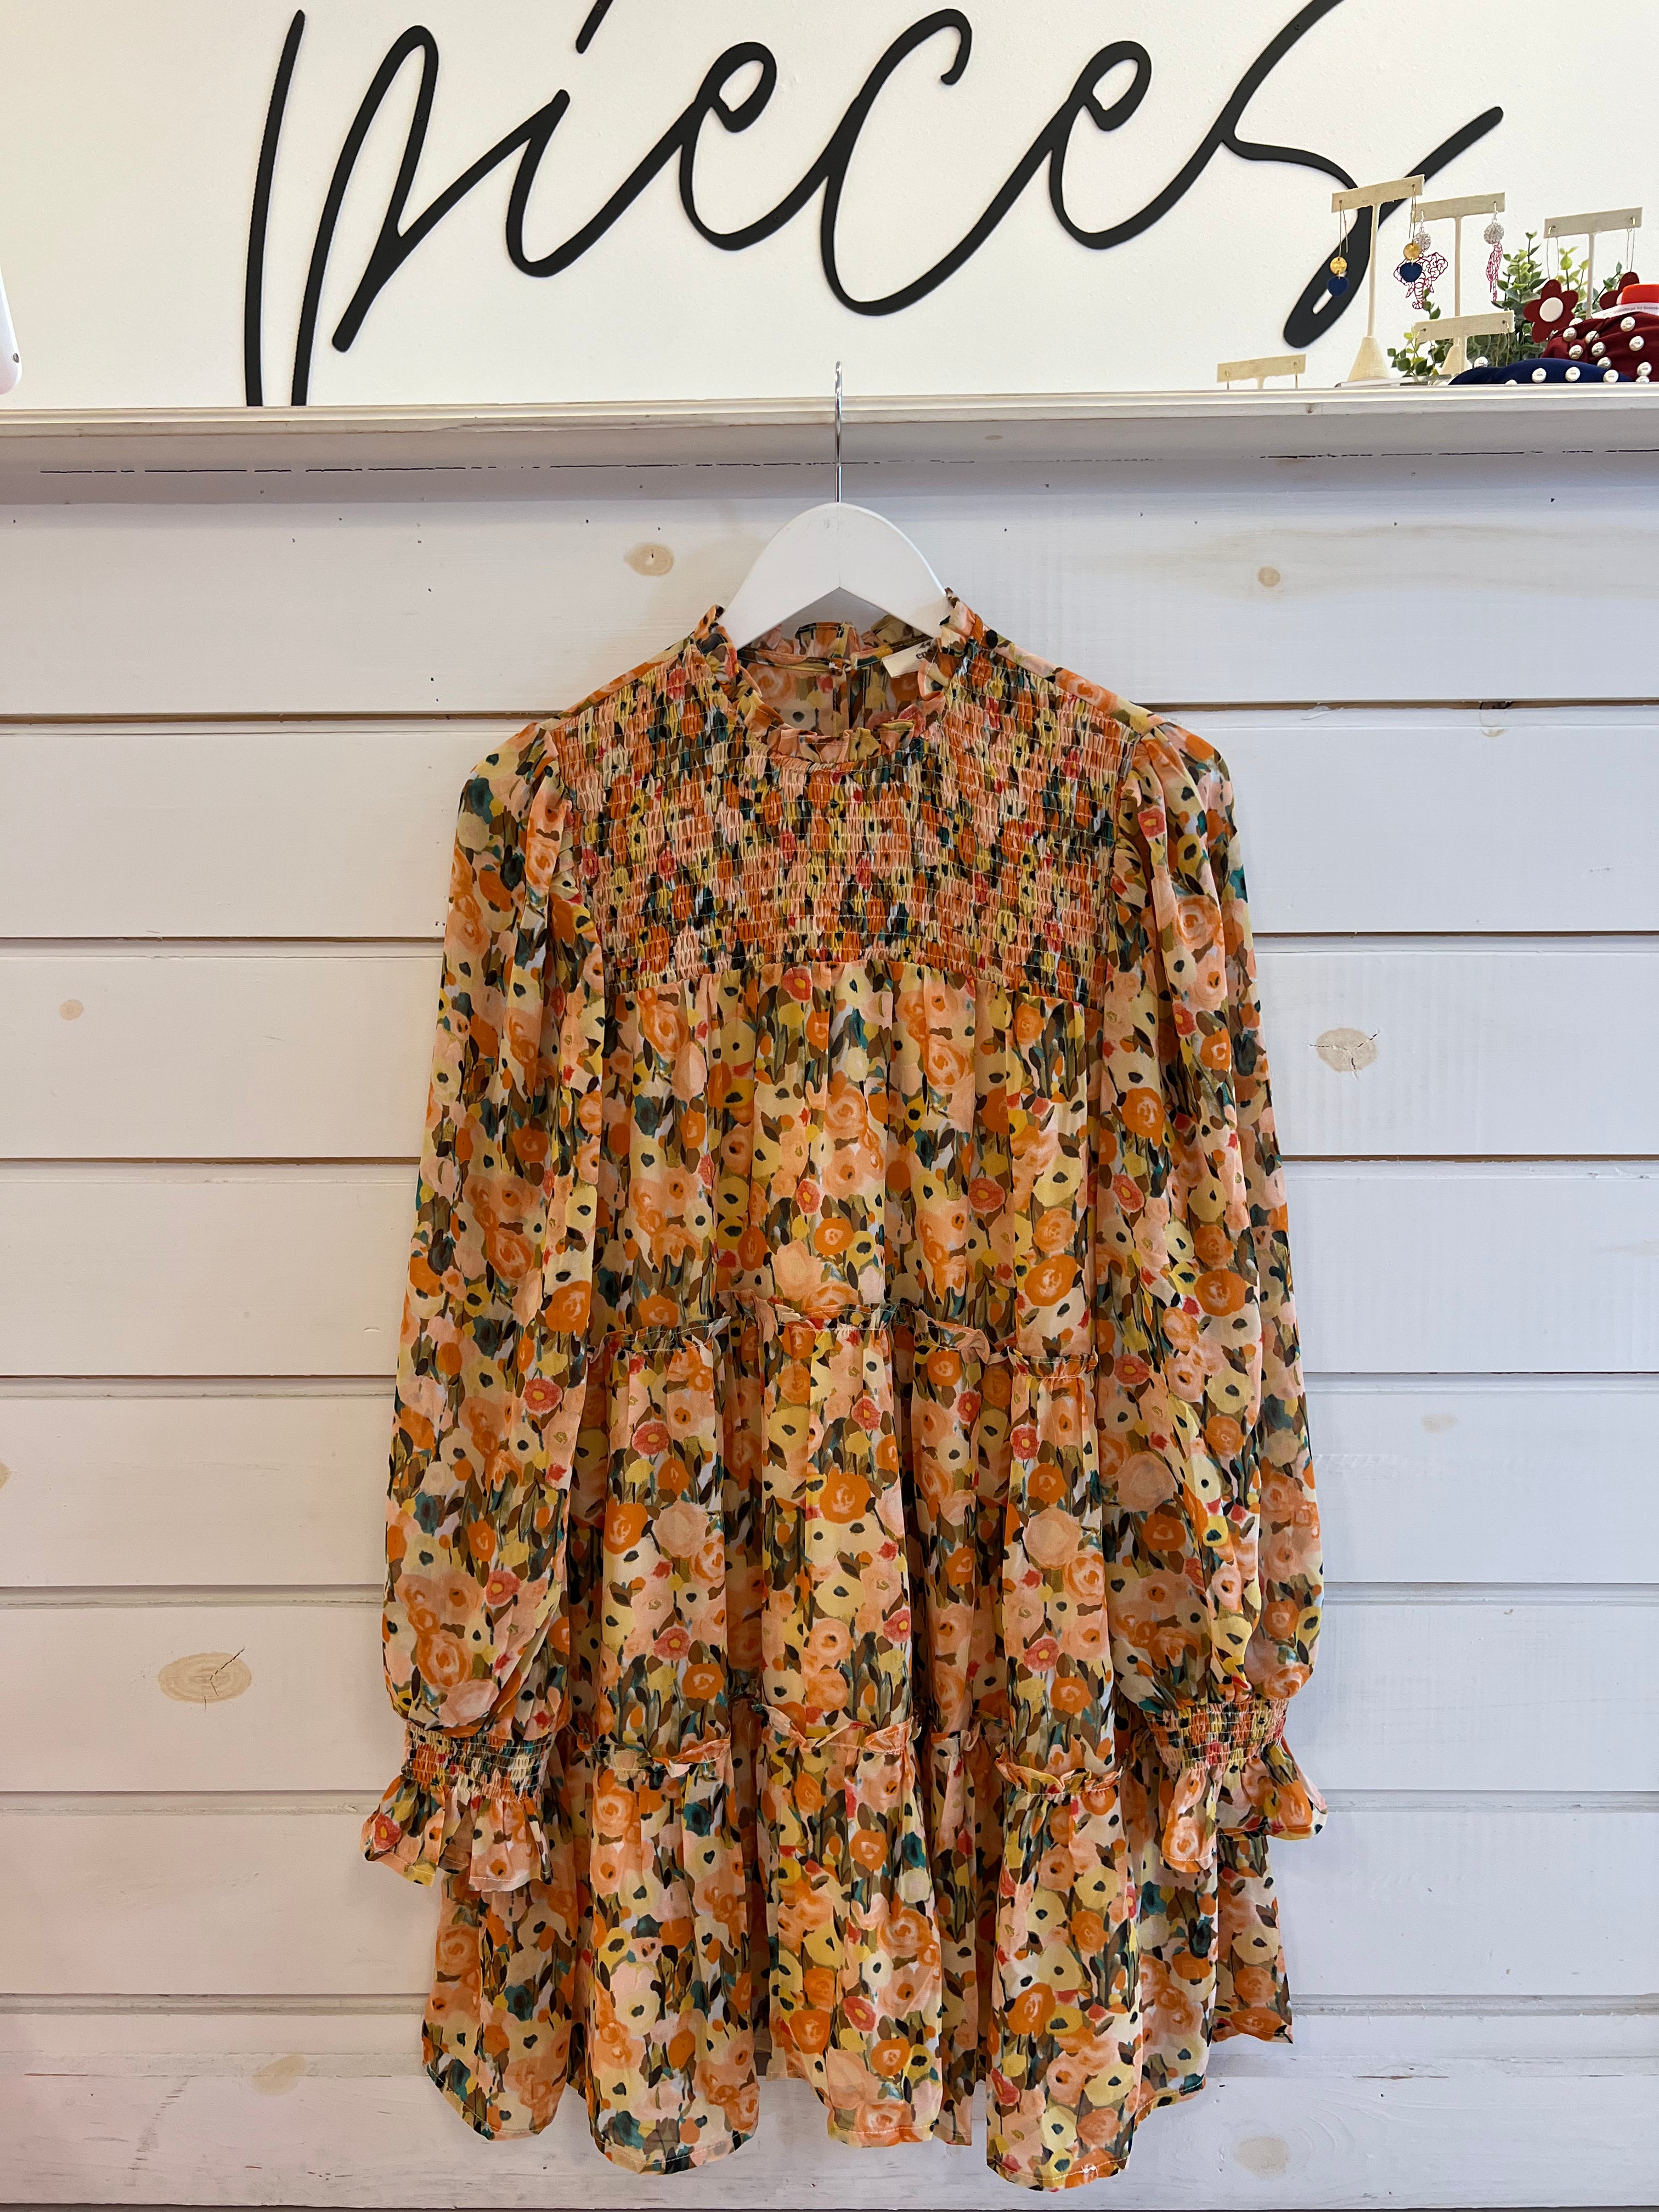 The Ginger Blooms Dress